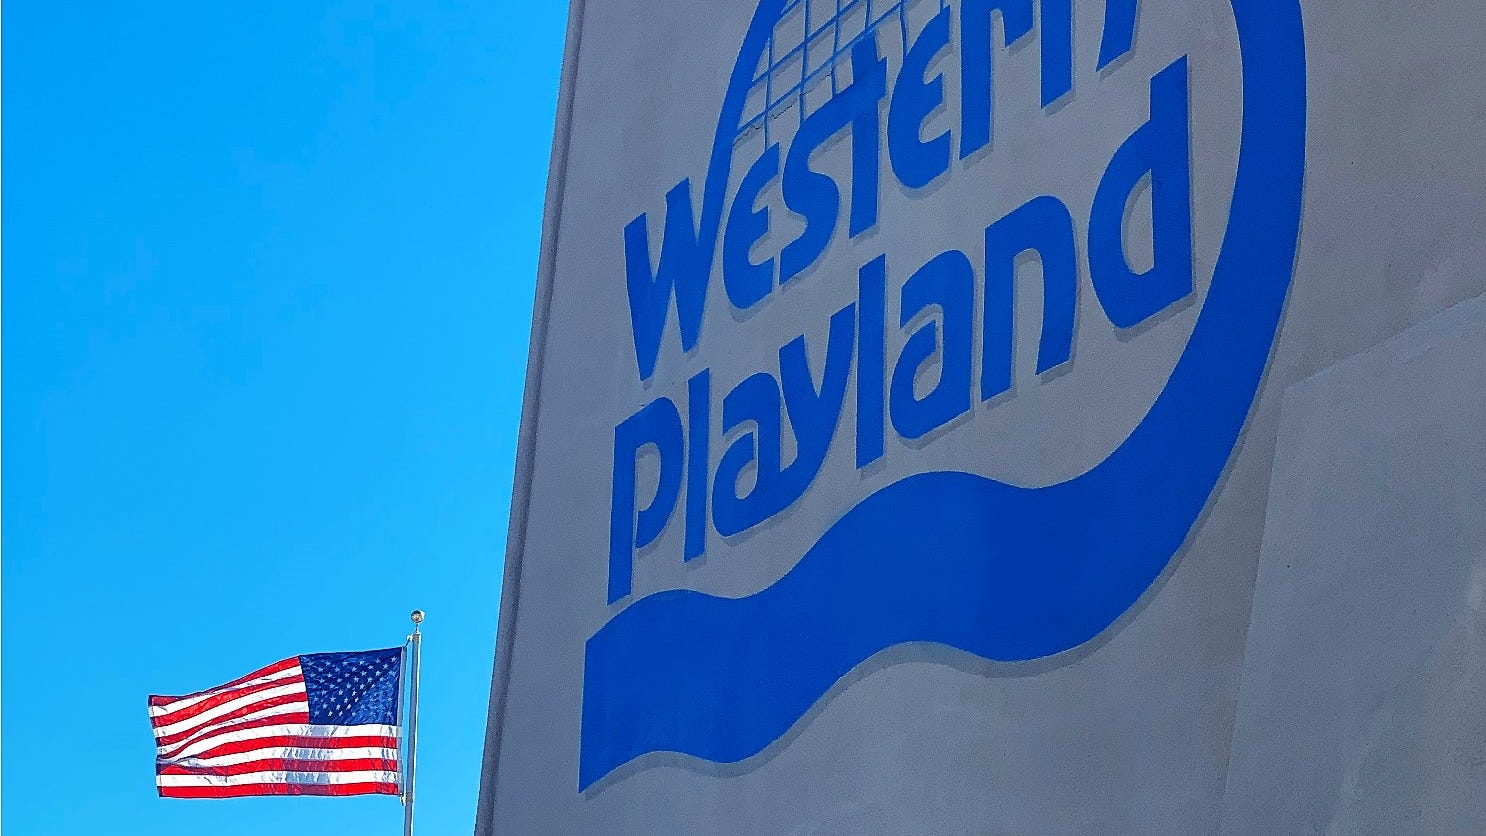 When does Western Playland open? Details on admission prices, hours